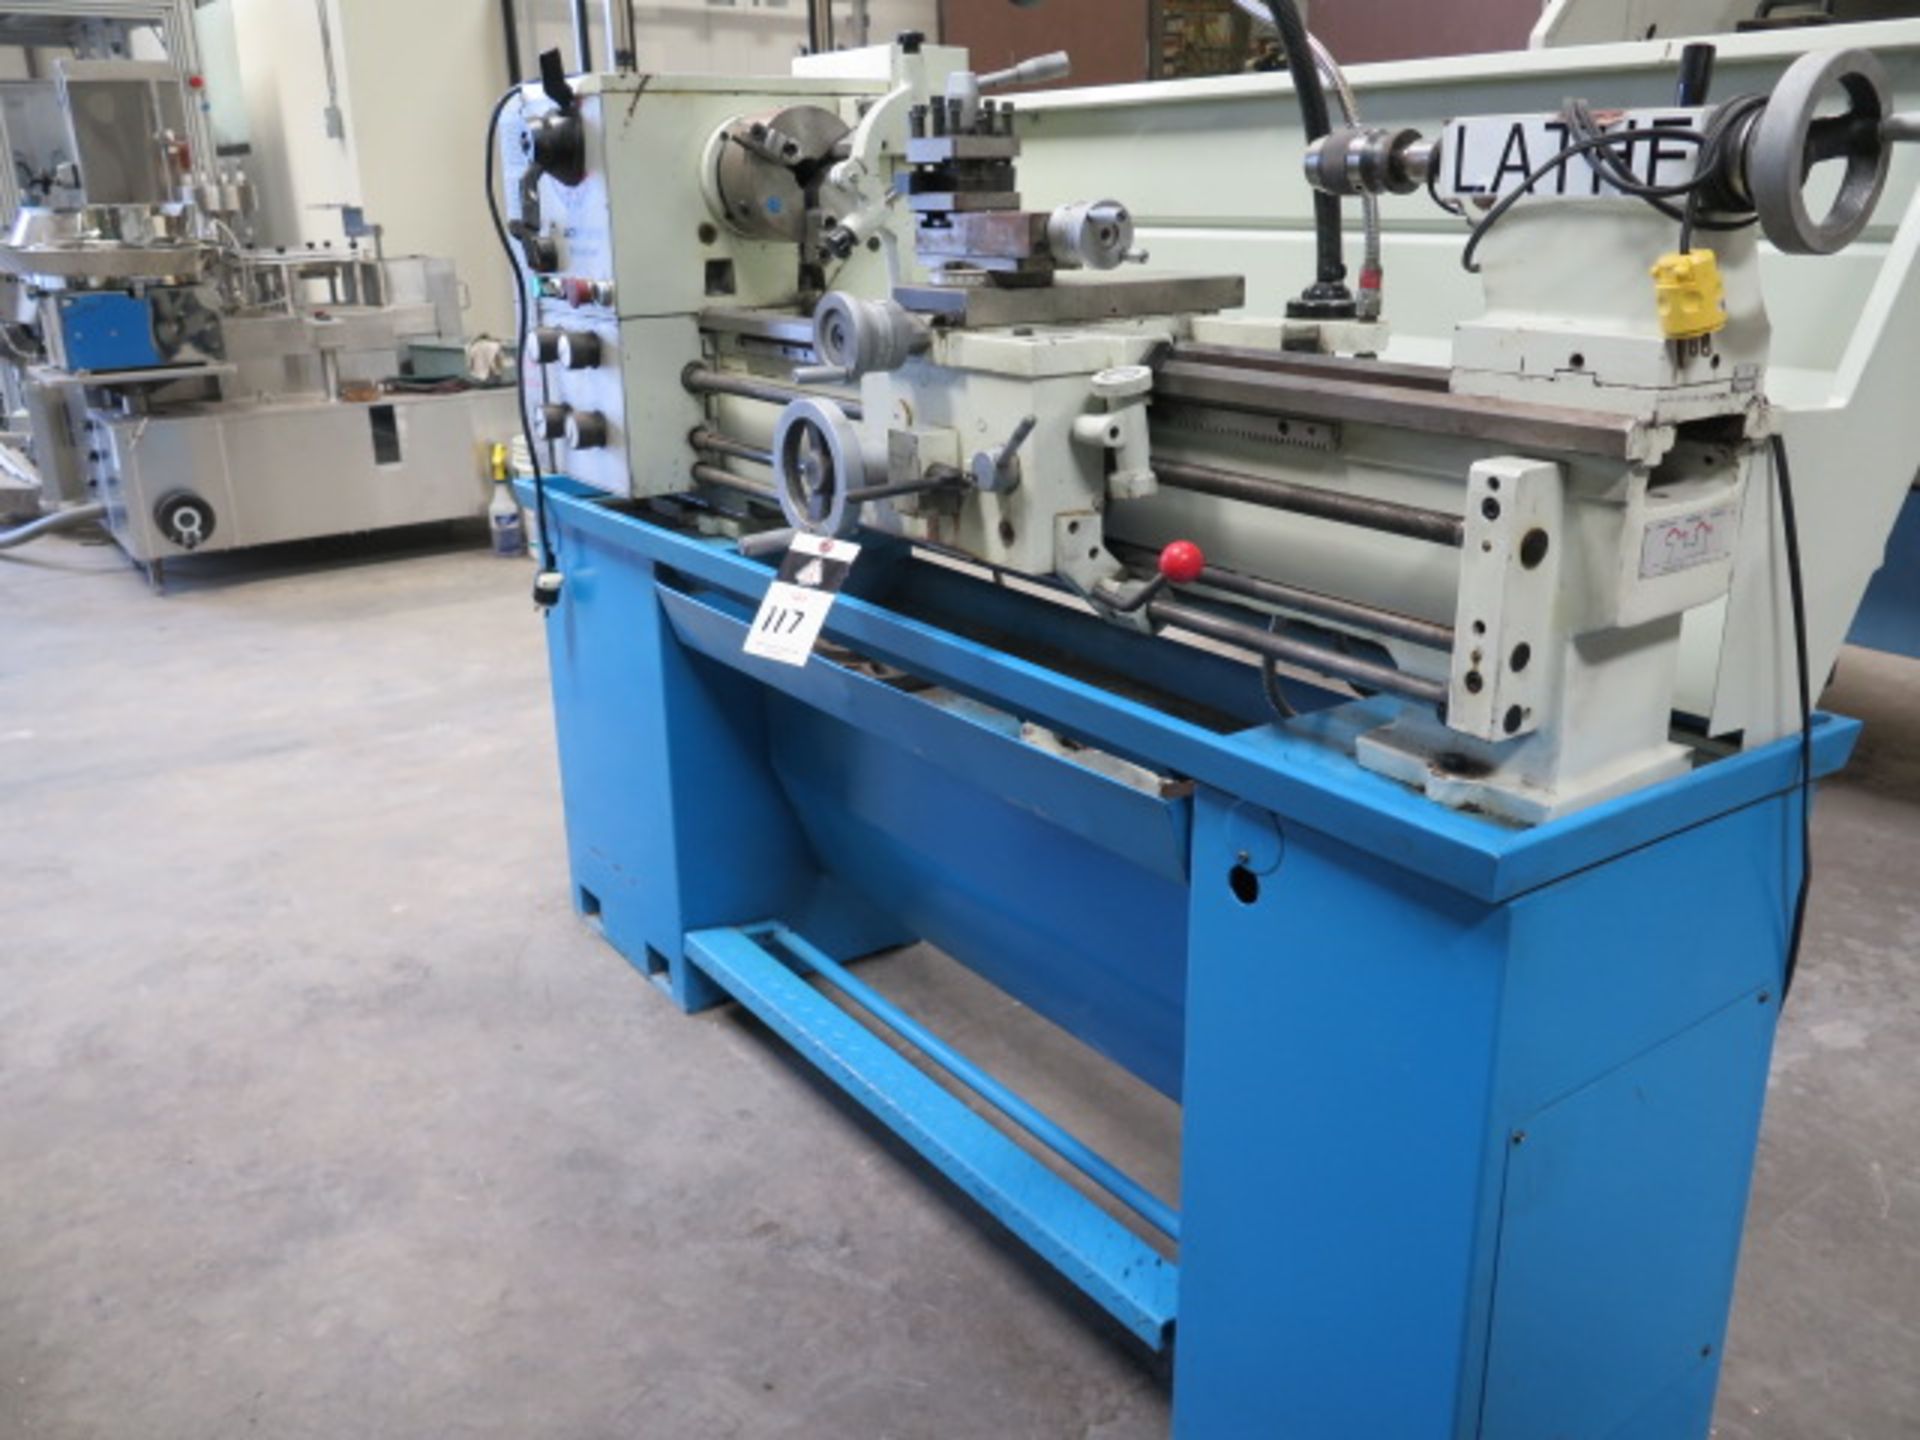 Acra Turn FI-1340 GSM 13" x 40" Geared Gap Bed Lathe w/ 70-2000 RPM, Inch/mm Threading, SOLD AS IS - Image 3 of 8